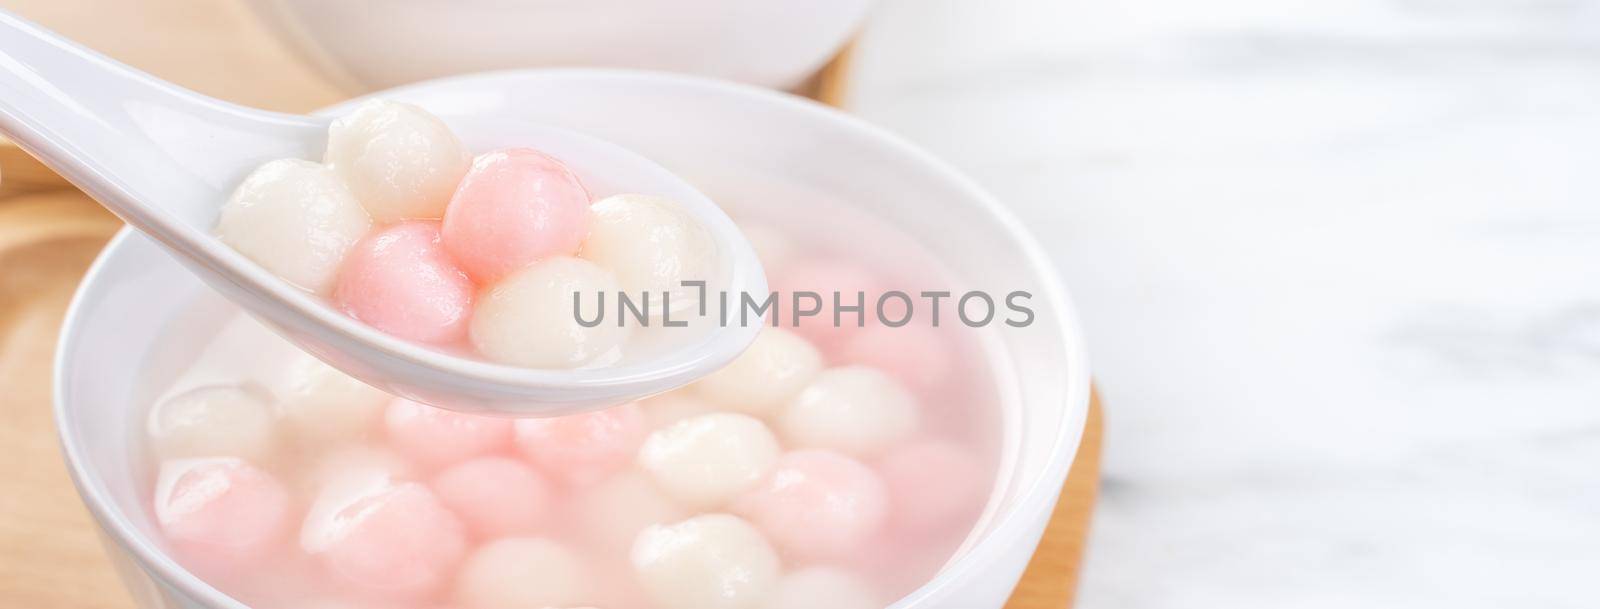 Tang yuan, tangyuan, delicious red and white rice dumpling balls in a small bowl. Asian traditional festive food for Chinese Winter Solstice Festival, close up. by ROMIXIMAGE